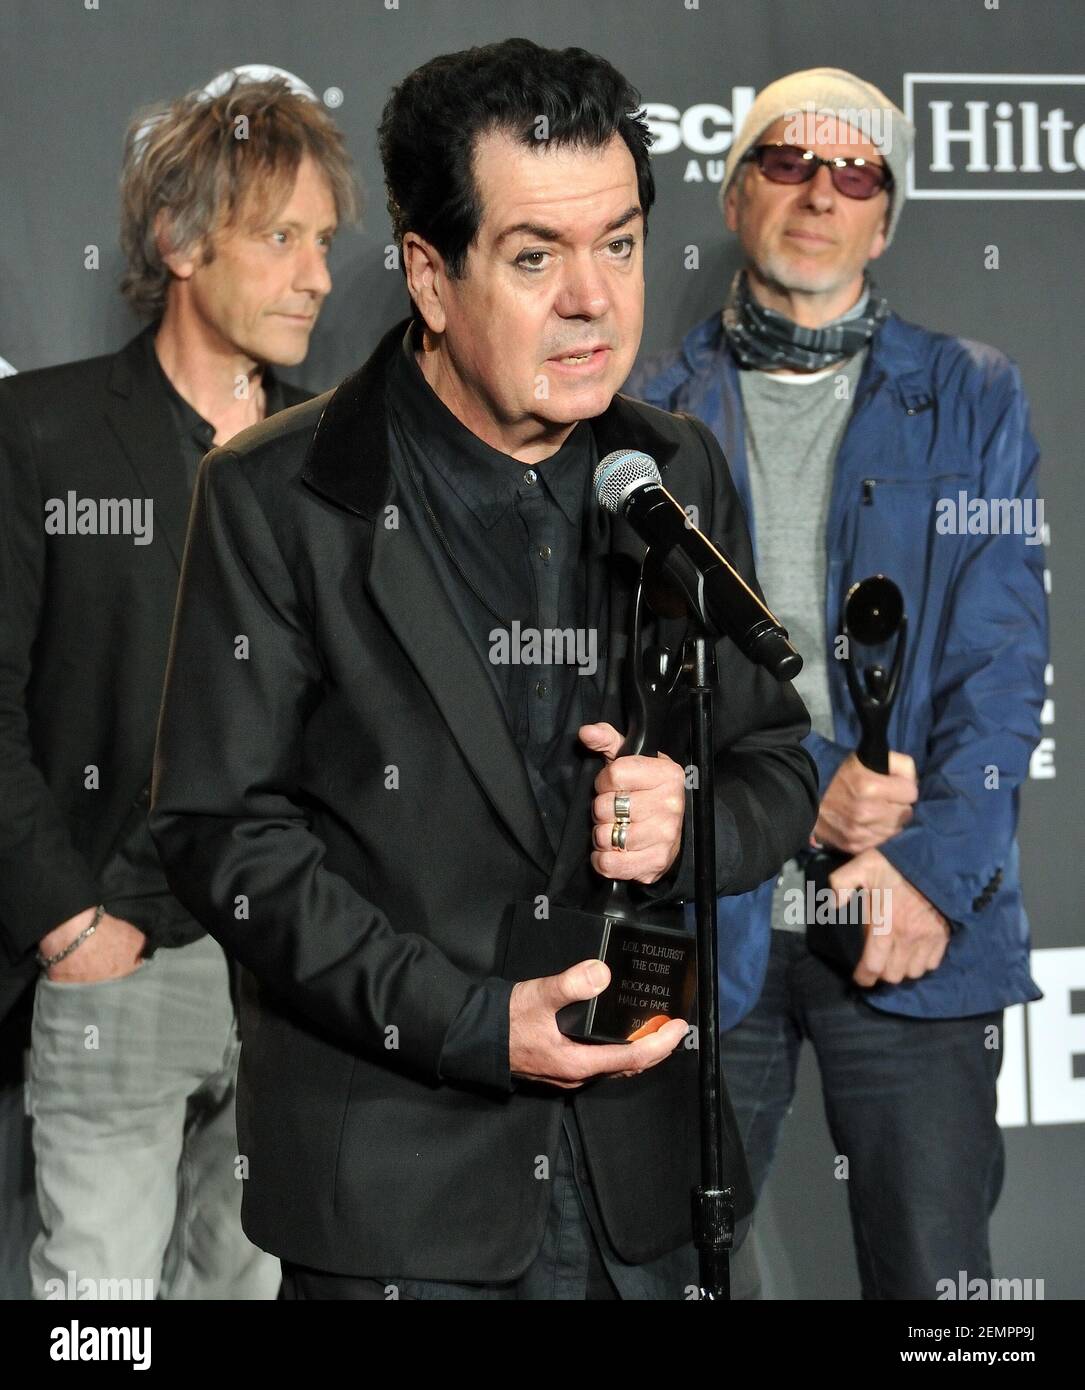 Lol Tolhurst of The Cure in the press room at the 2019 Rock and Roll Hall  of Fame Induction Ceremony at the Barclays Center in Brooklyn, NY on March  29, 2019. (Photo